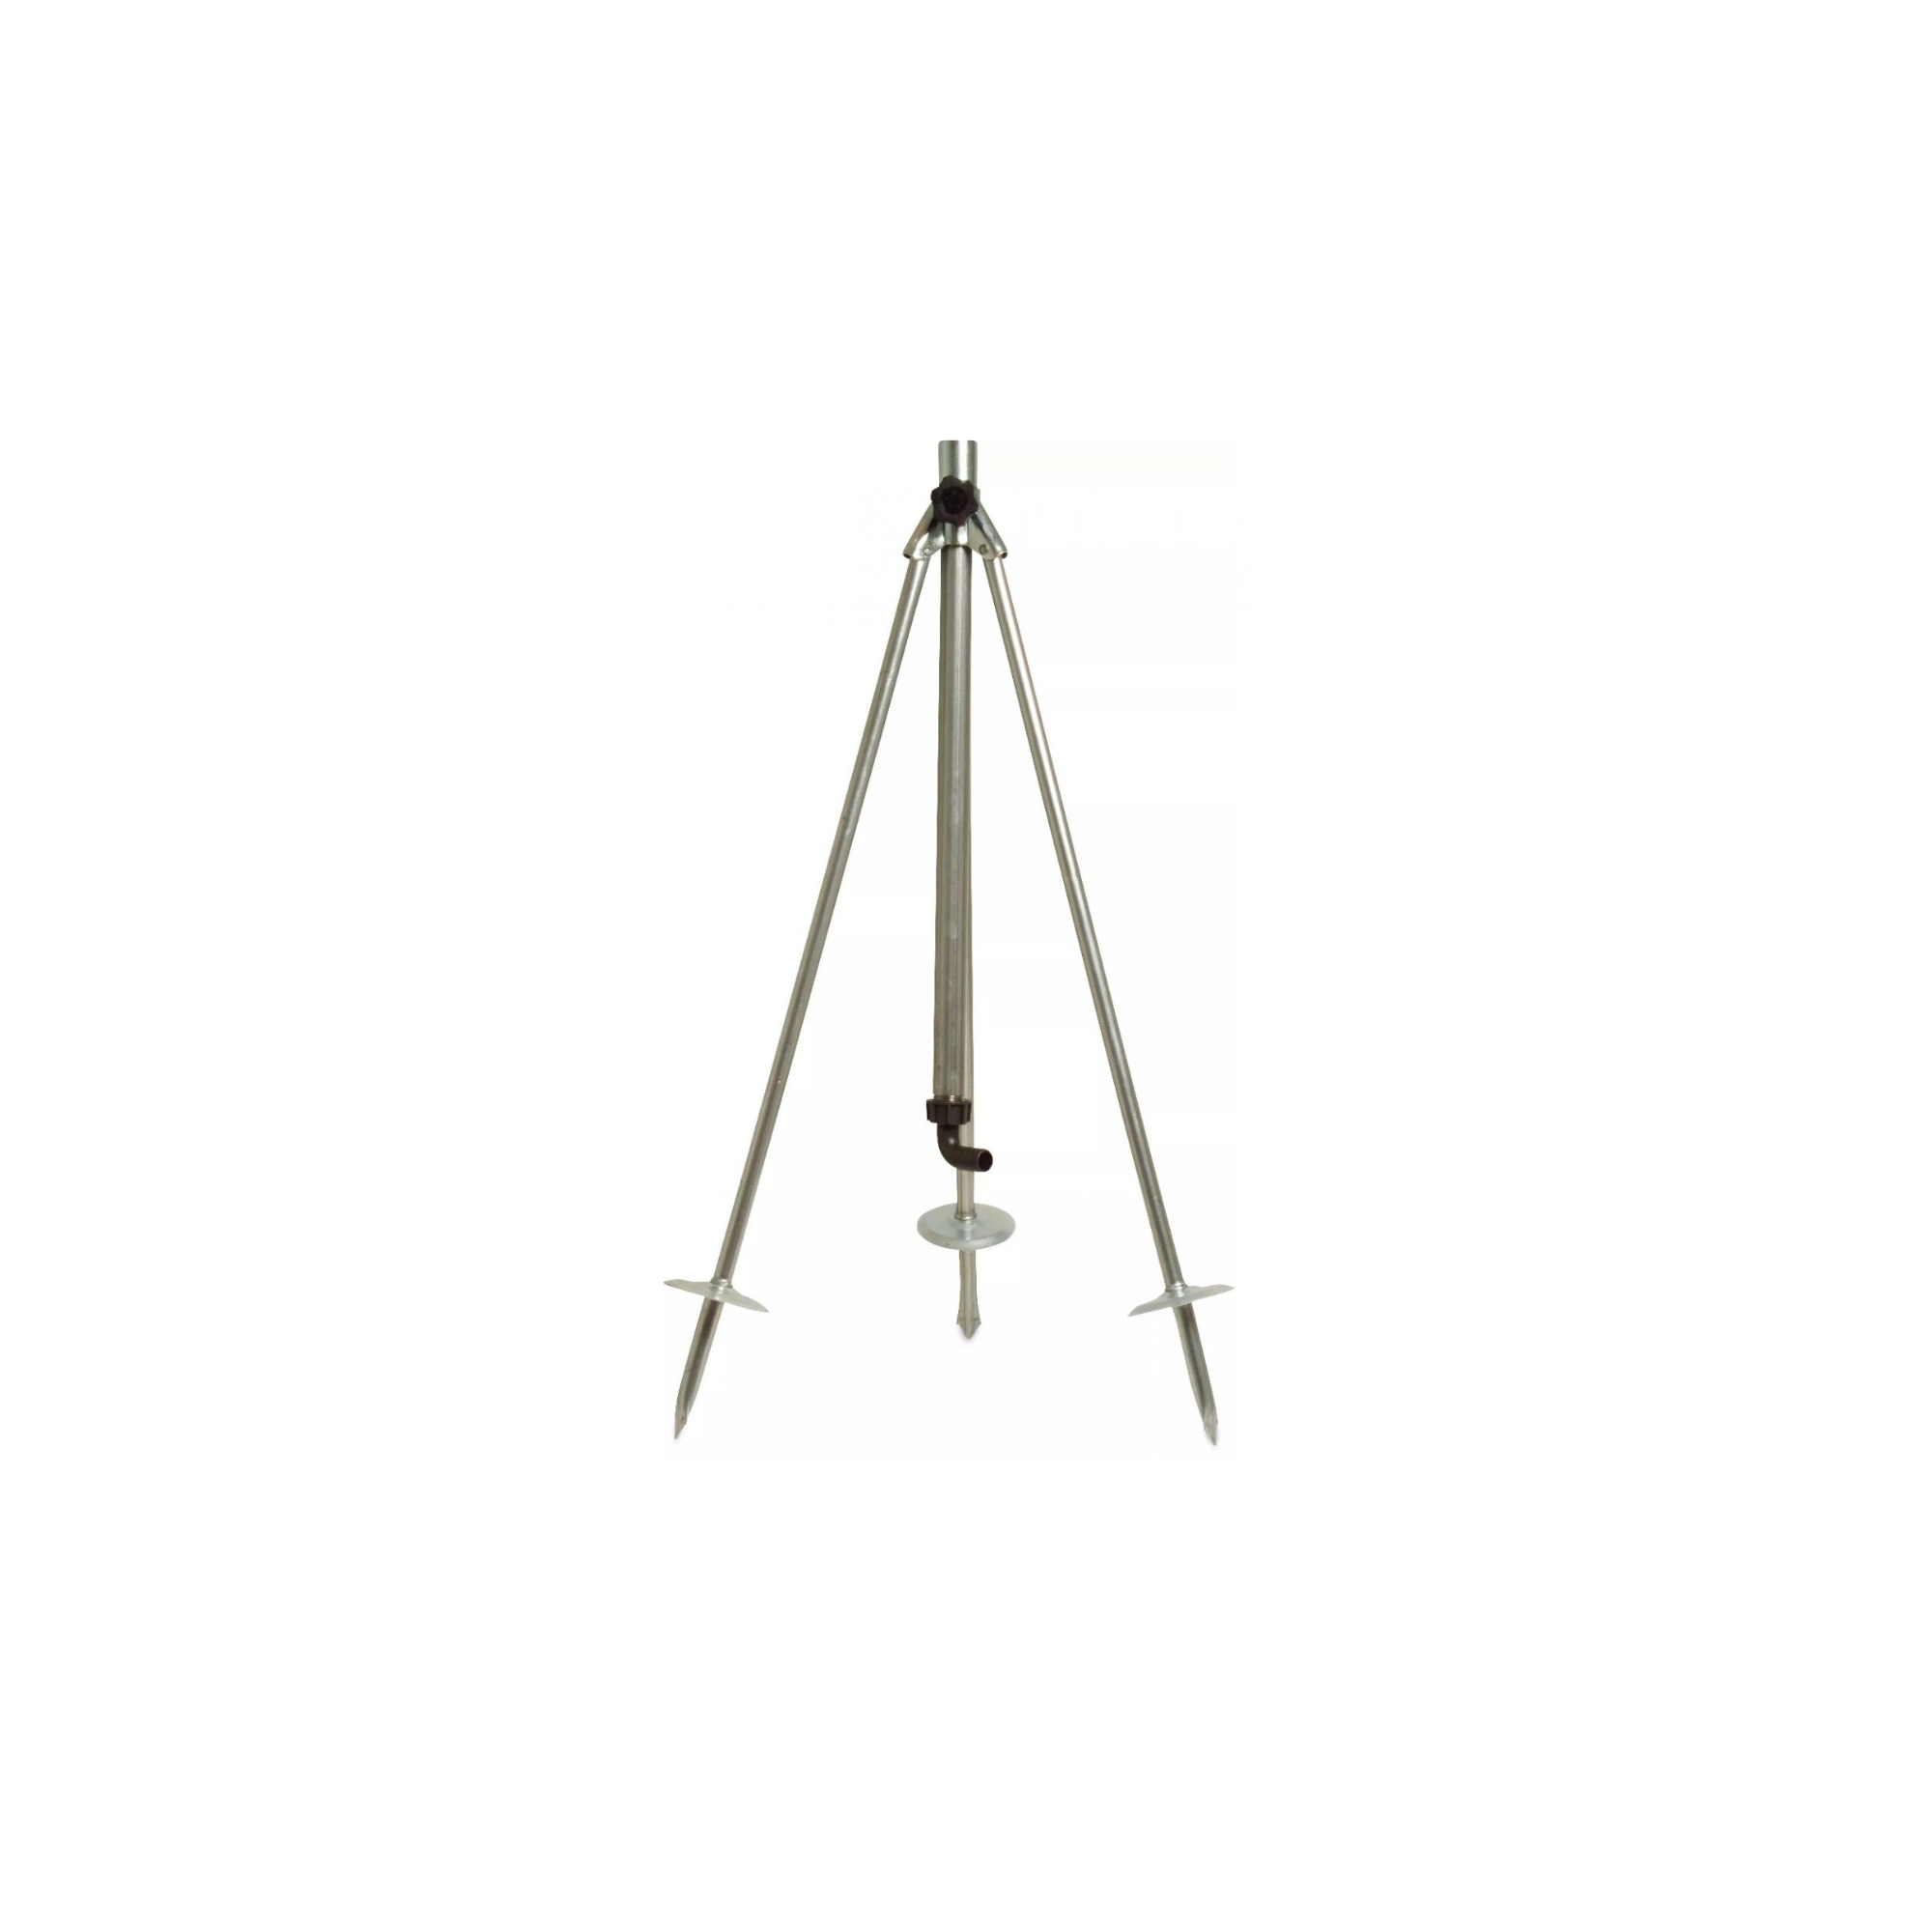 Galvanized Tripod Mounting ¾” BSP Sprinkler Not Included